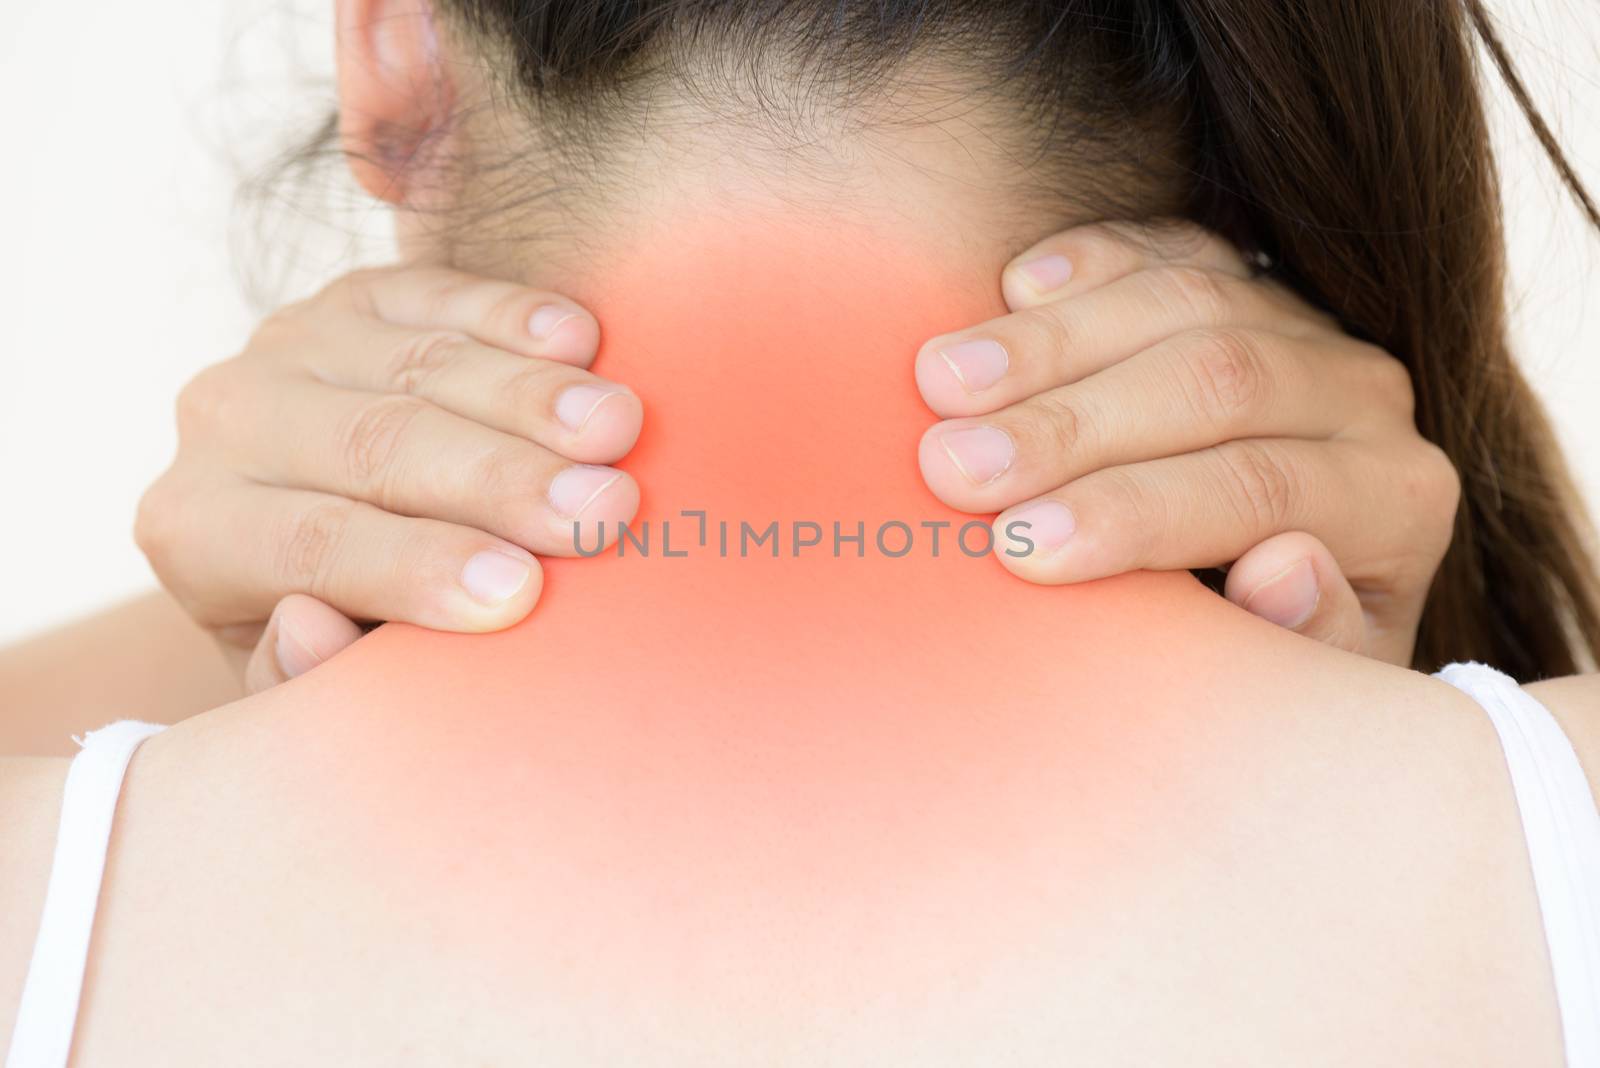 Closeup woman neck and shoulder pain and injury. Health care and medical concept.